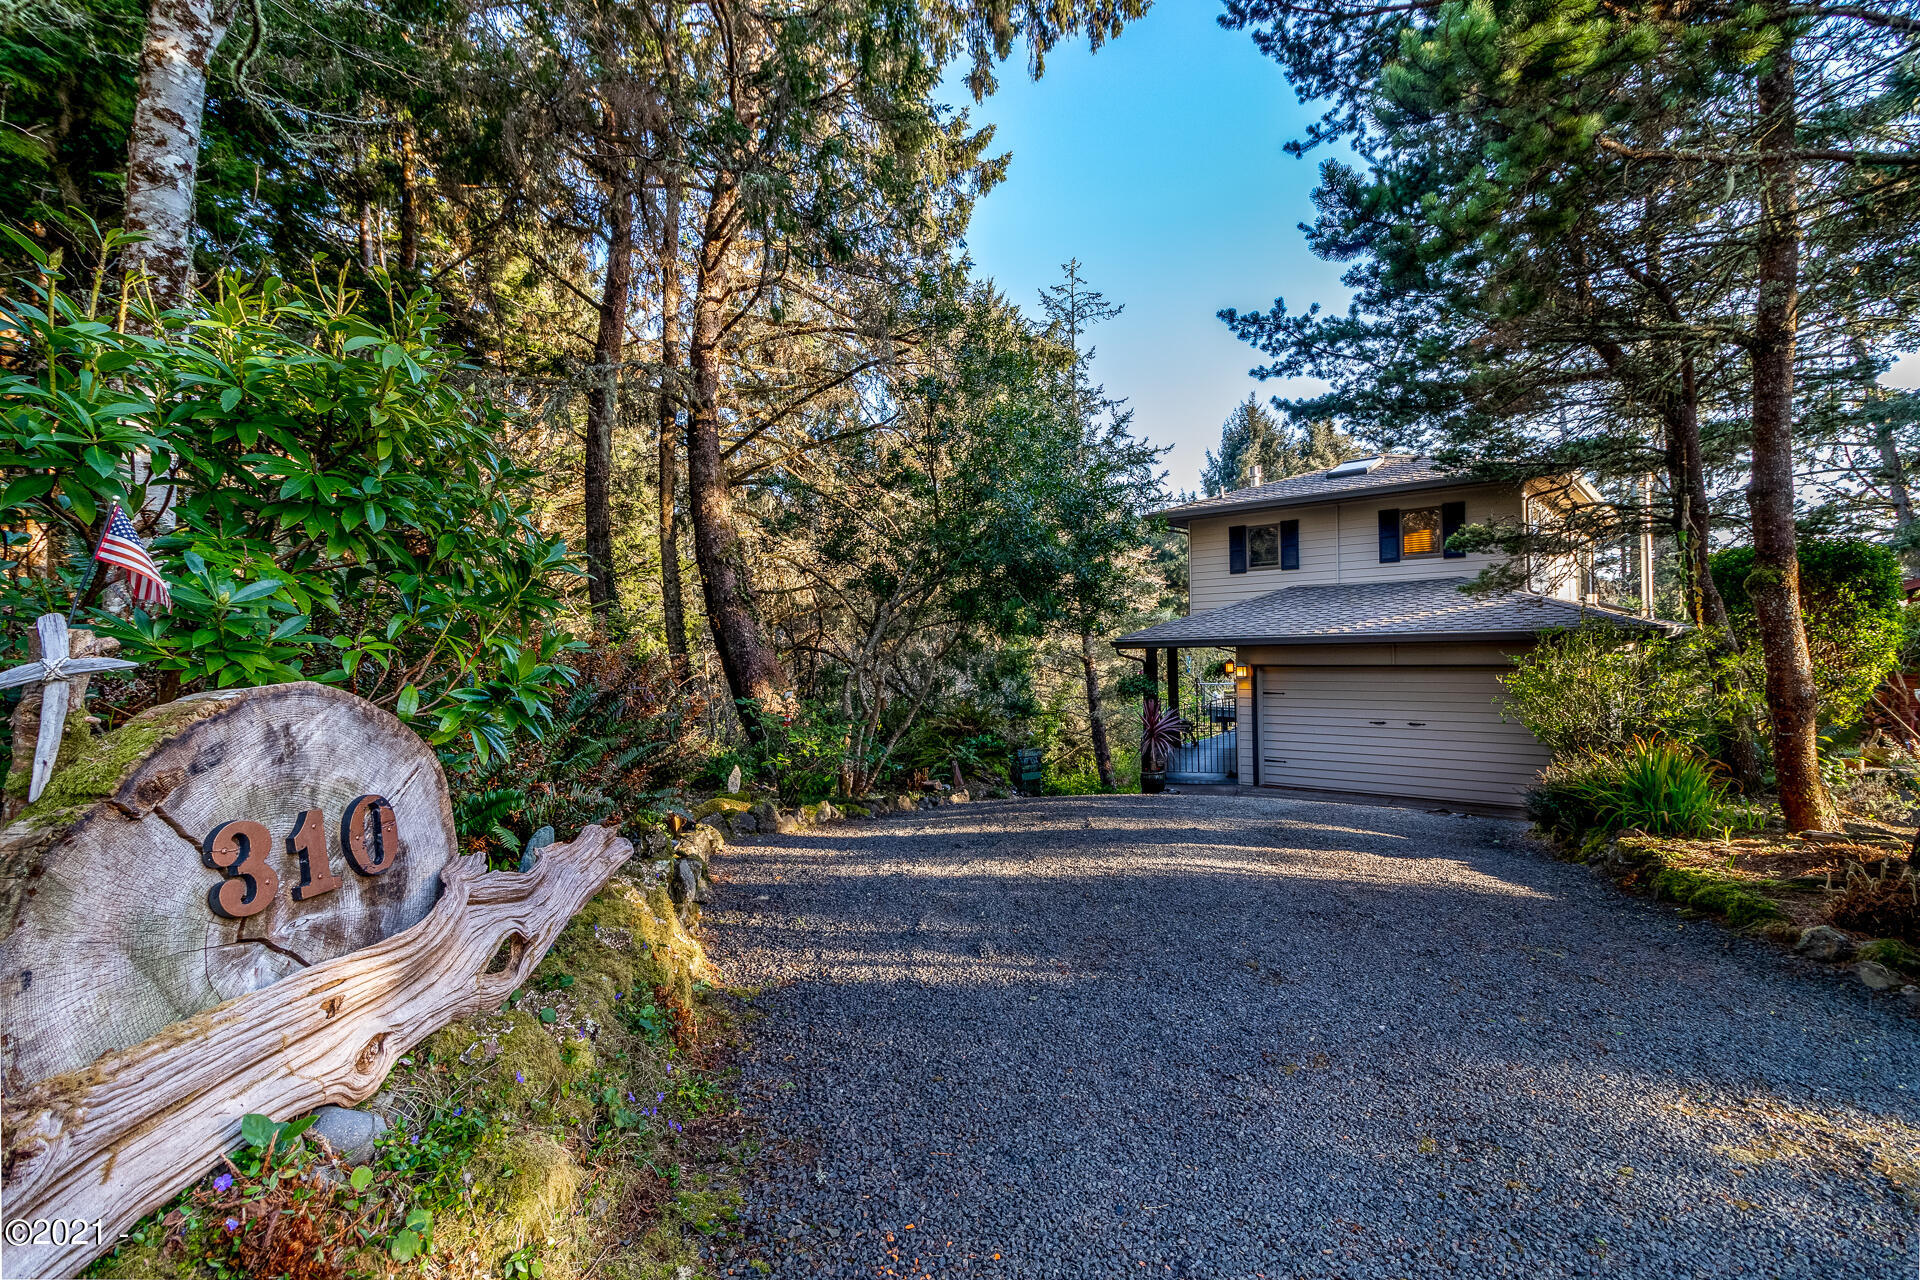 310 SW Midden Reach Depoe Bay, Gleneden Beach, Lincoln City, Newport, Otis, Rose Lodge, Seal Rock, Waldport, Yachats, To Home Listings - Amy Plechaty, Emerald Coast Realty Real Estate, homes for sale, property for sale